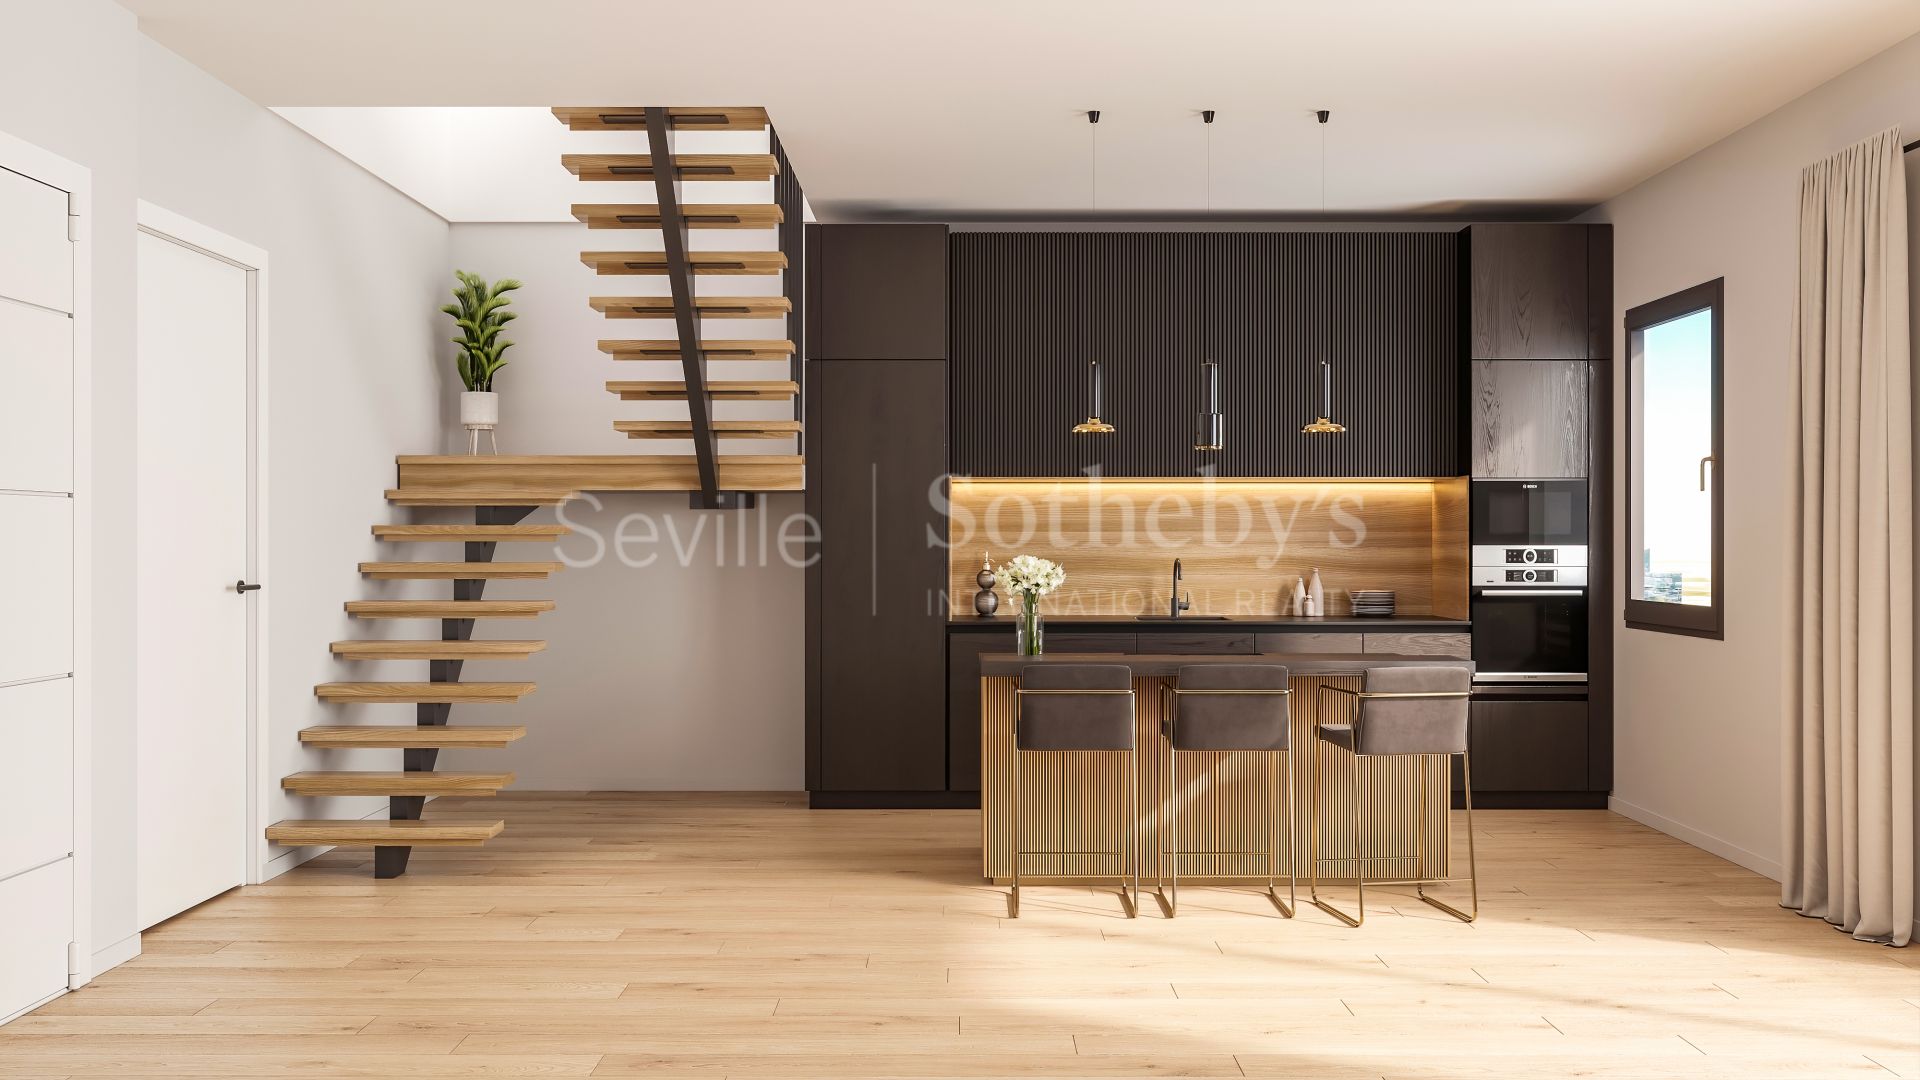 Newly built apartment in Nervion